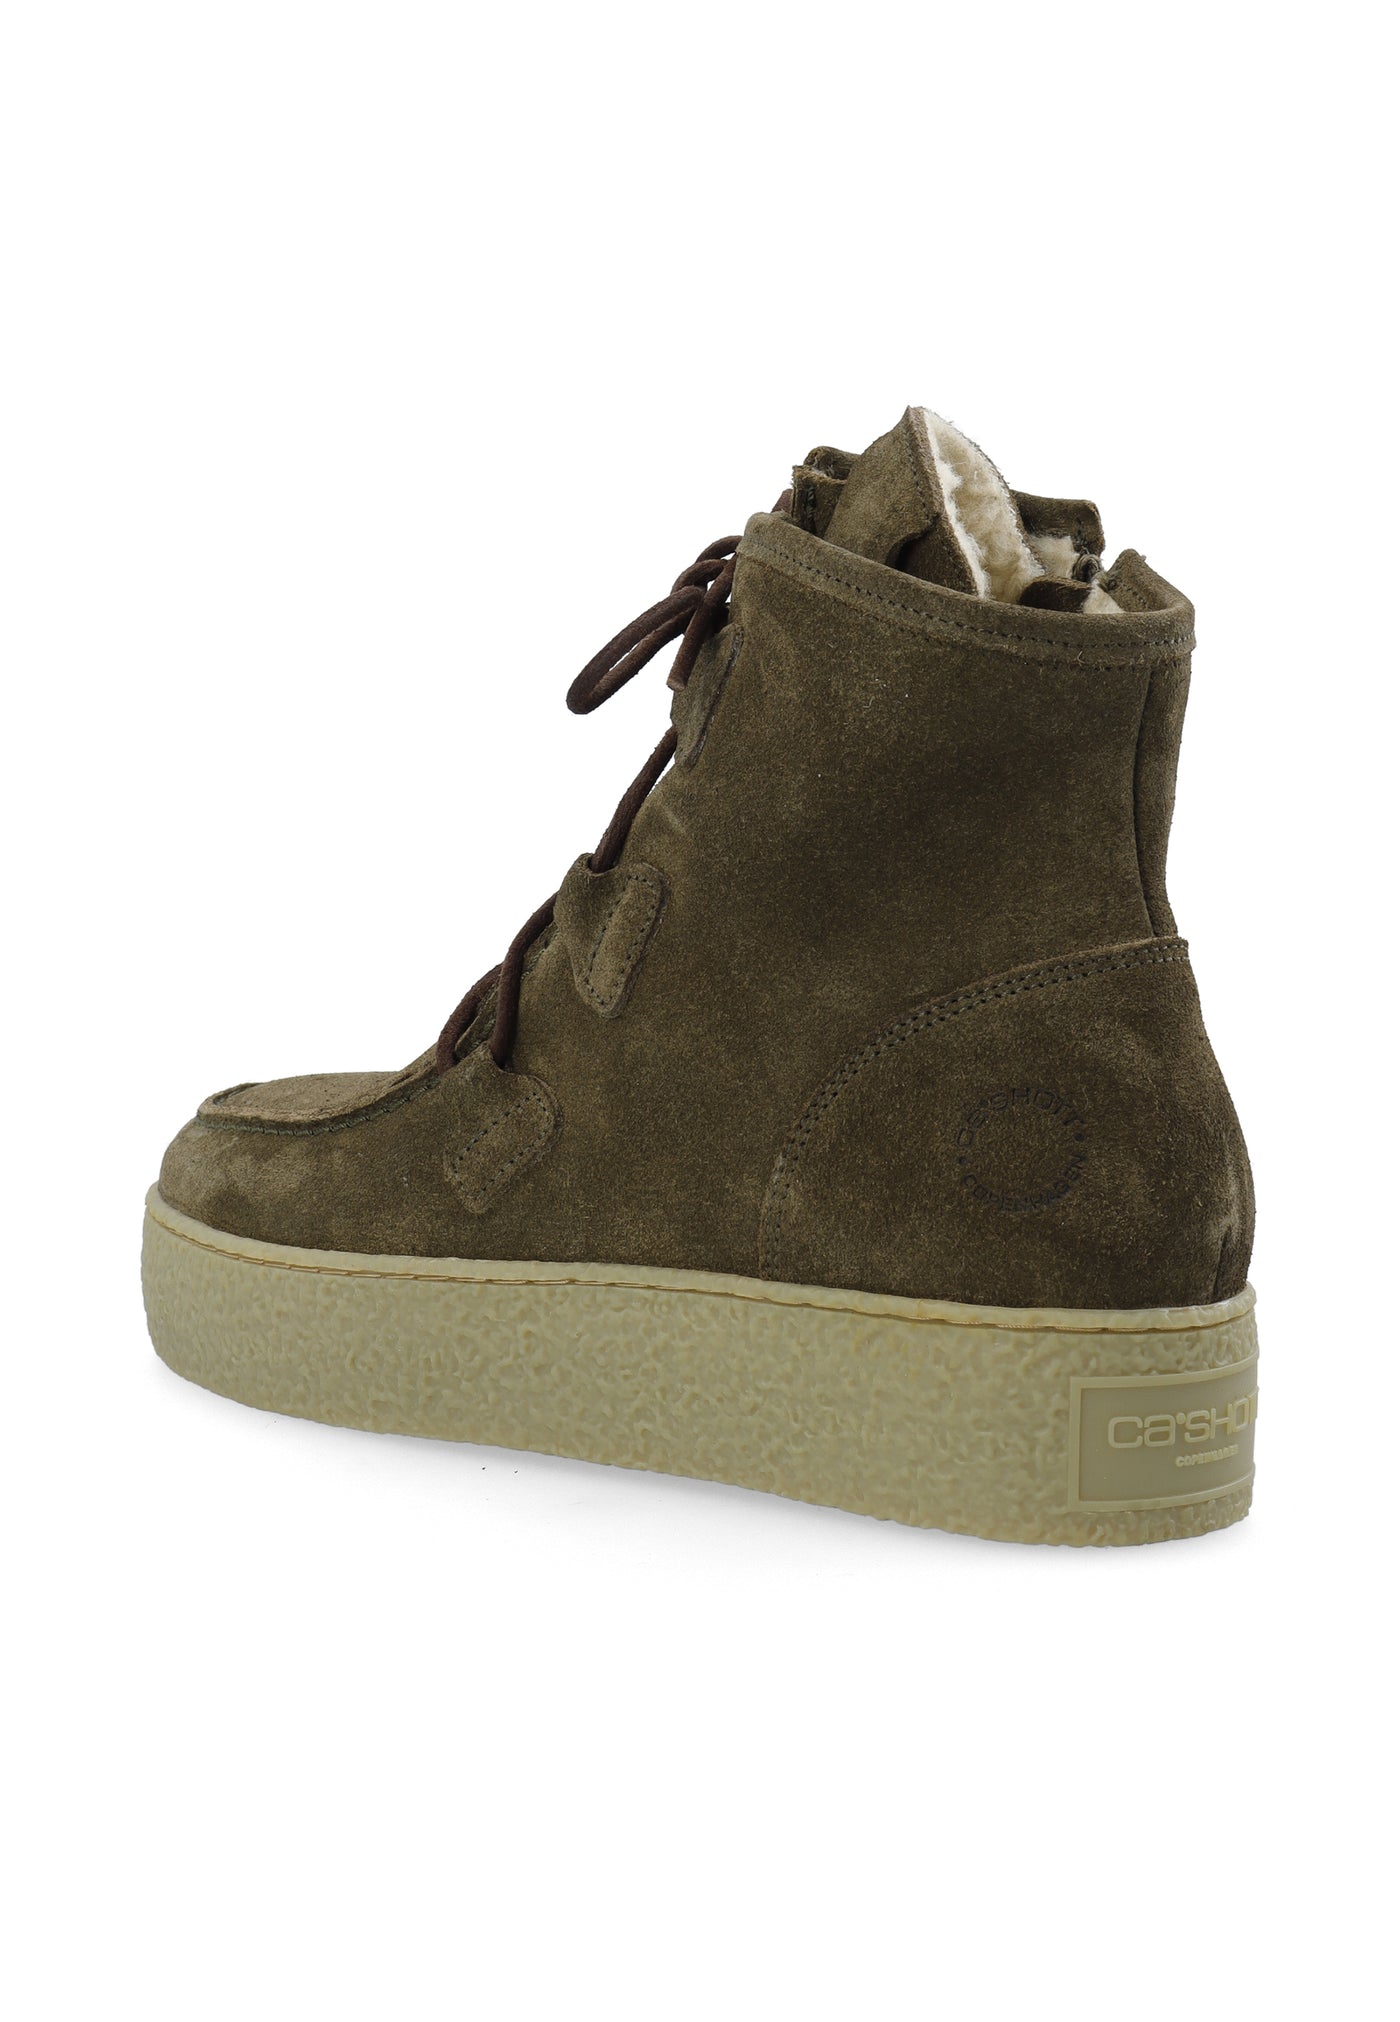 CASHOTT CASCAMILLA Lace Boot Warm Lining Oil Suede# Lace Up Olive